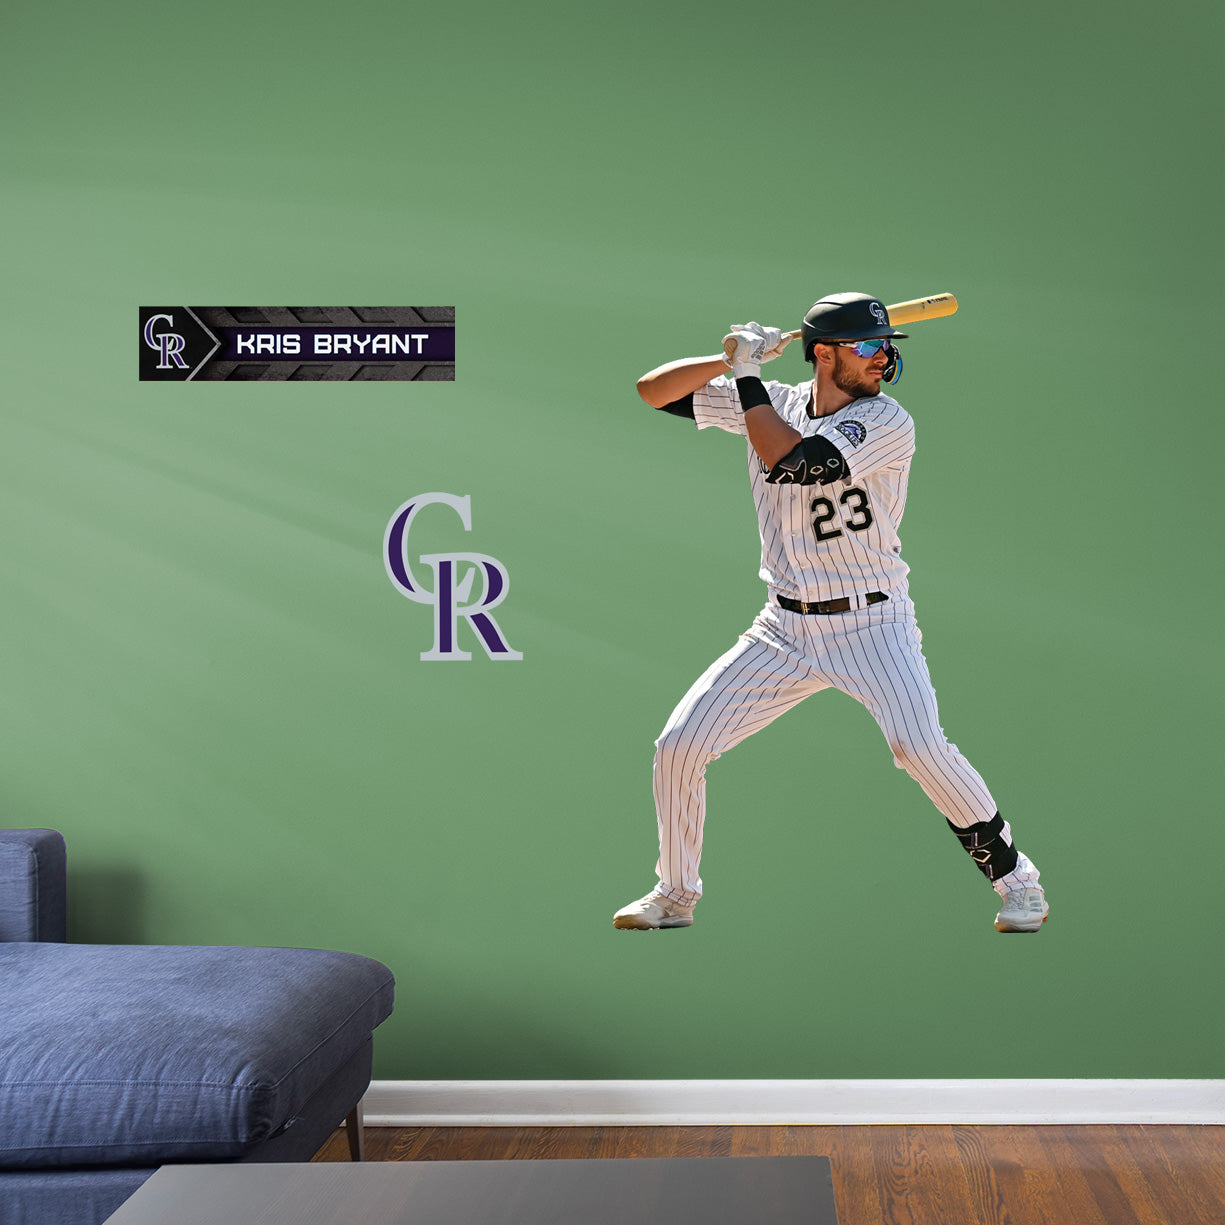 Colorado Rockies: Kris Bryant - Officially Licensed MLB Removable Adhesive Decal